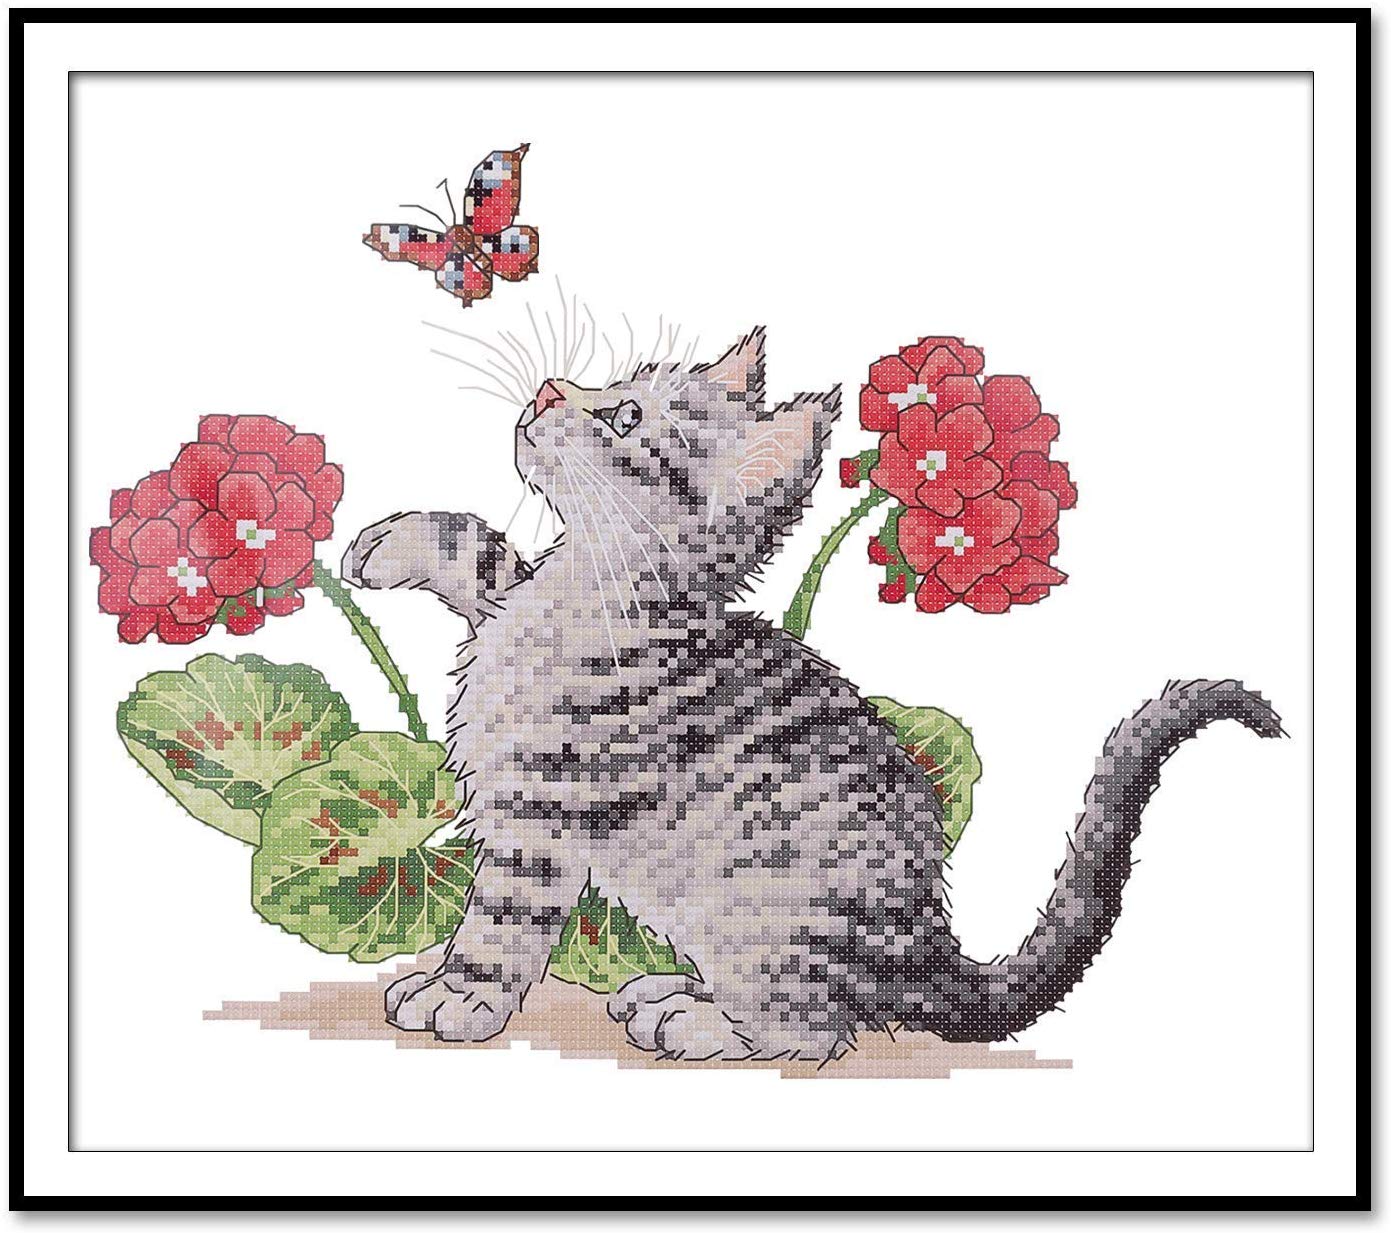 cRAFTILOO cats cross stitch kits for beginners. 5 stamped cross stitch kits  for kids.needlepoint kits